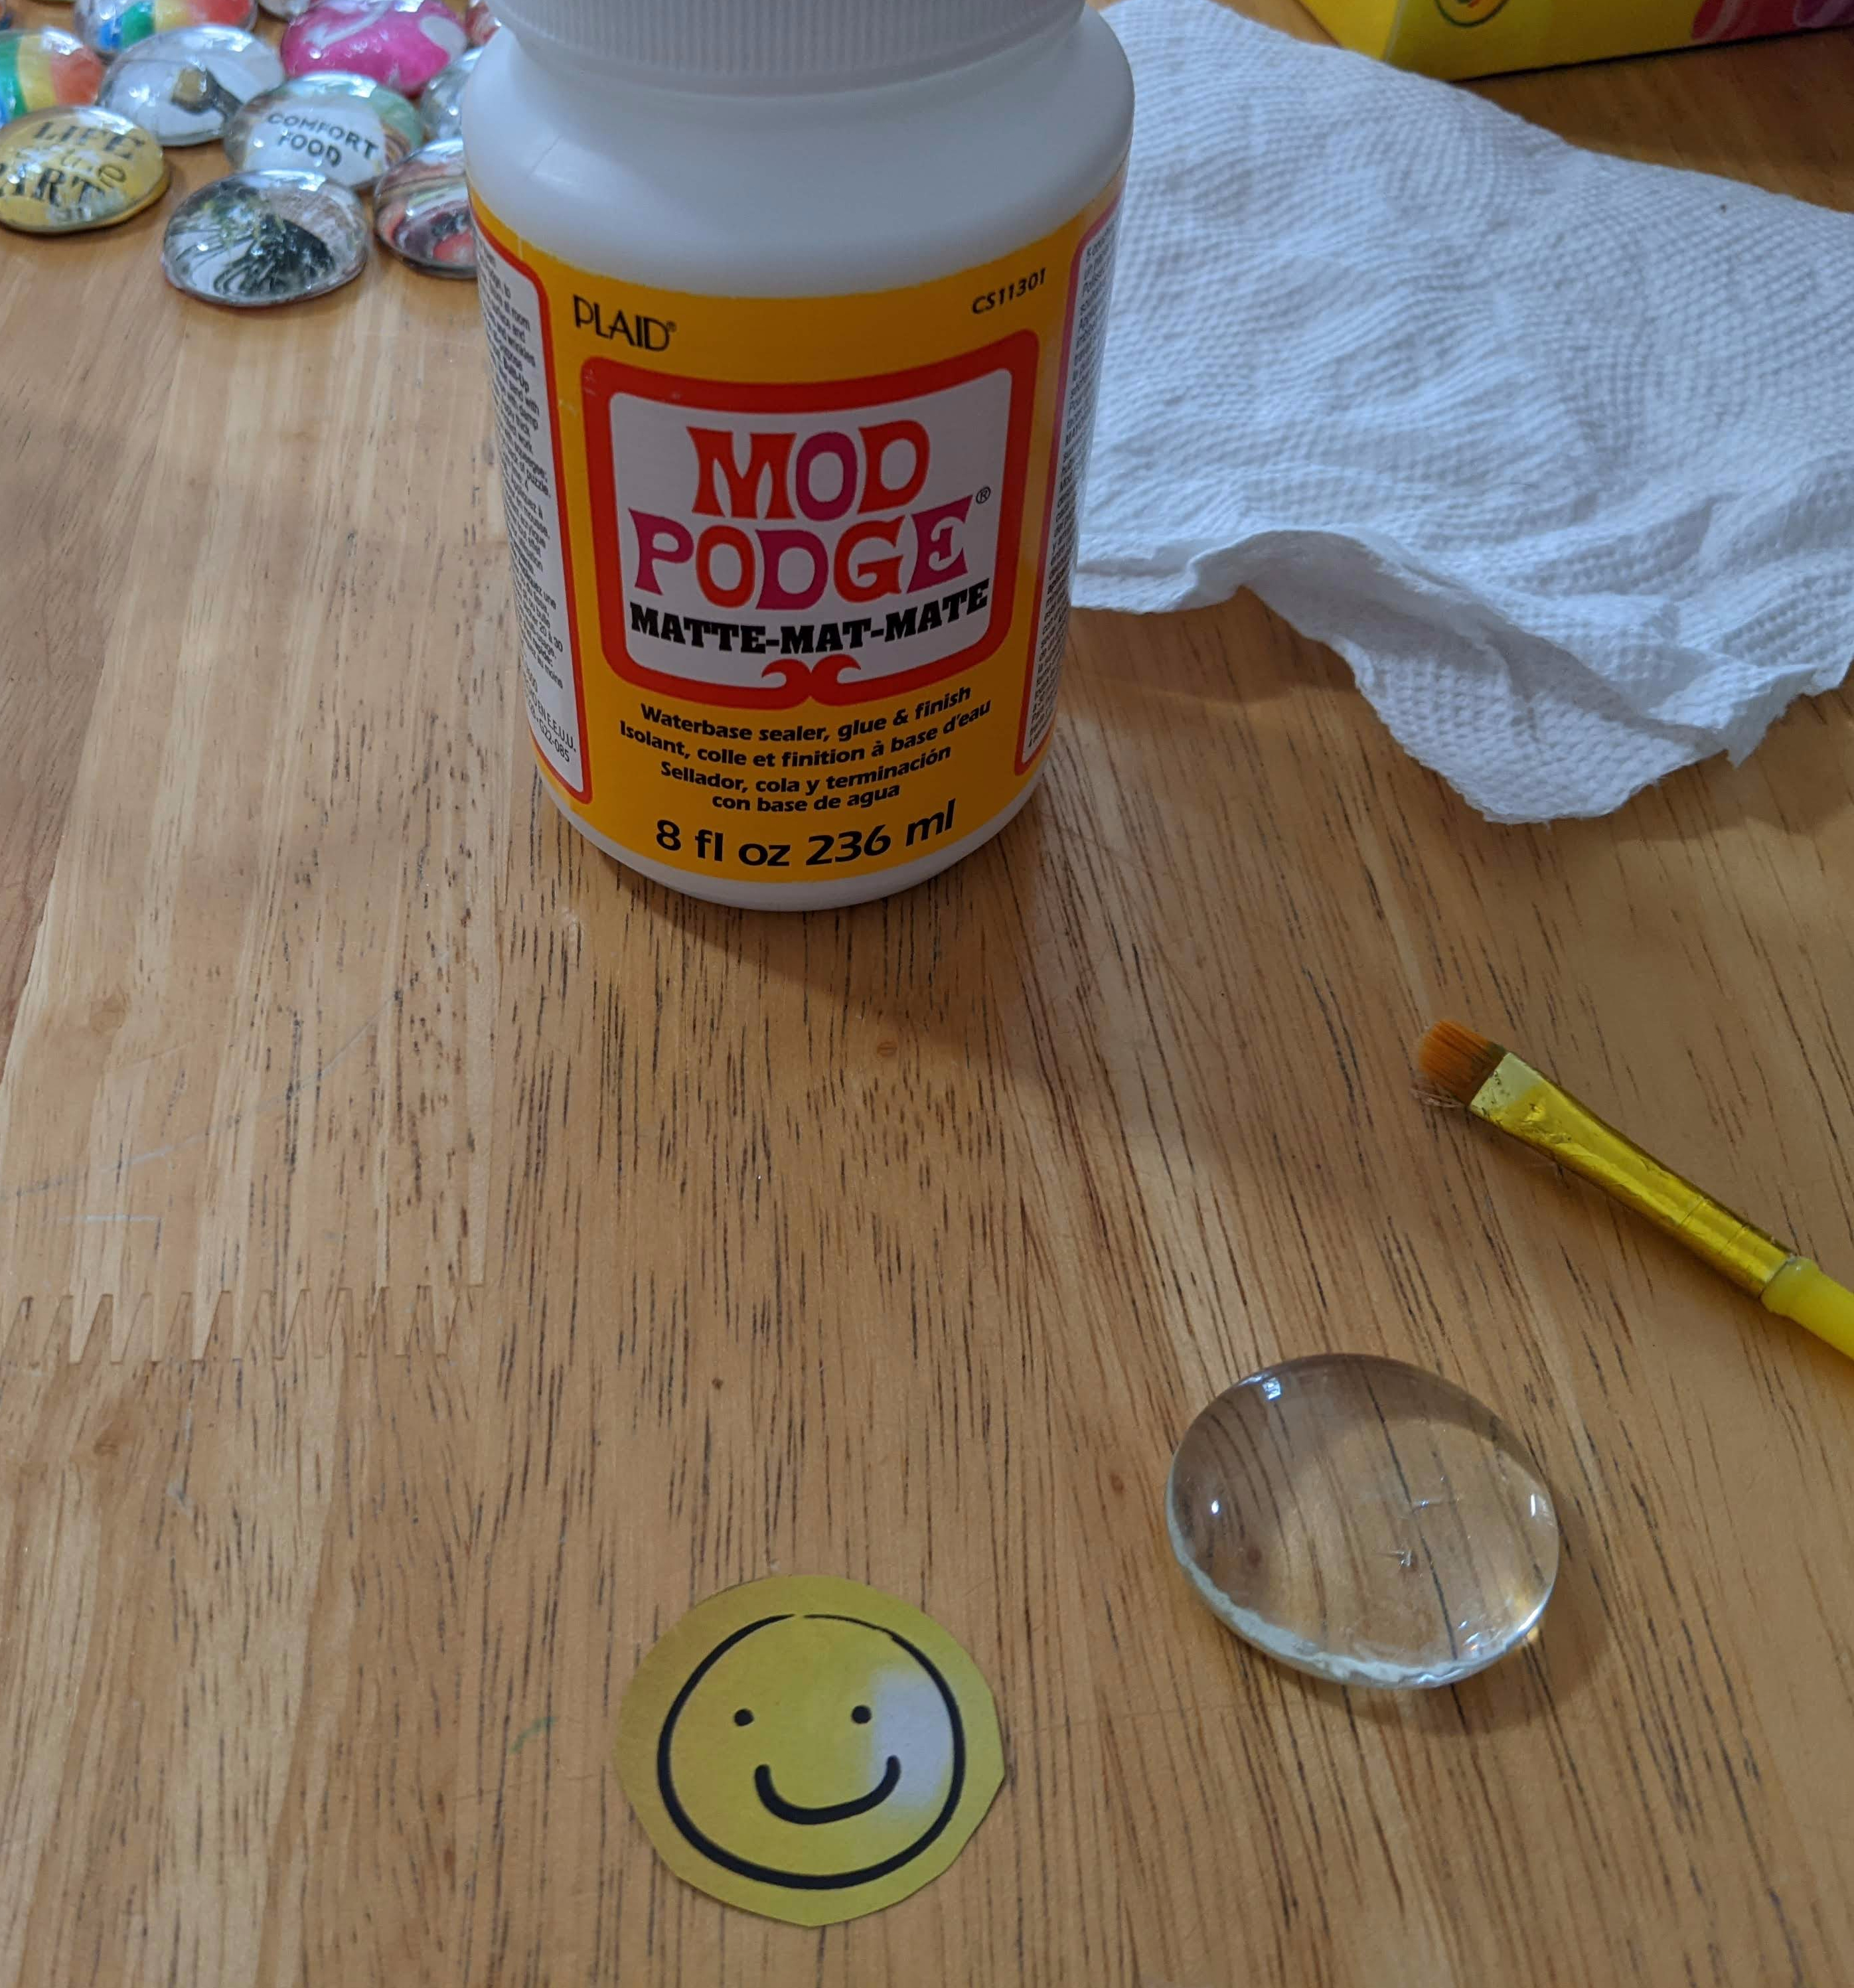 photo of bottle of Mod Podge next to a paper towel, a small yellow paintbrush, a glass gem, and a photo of a smiley face